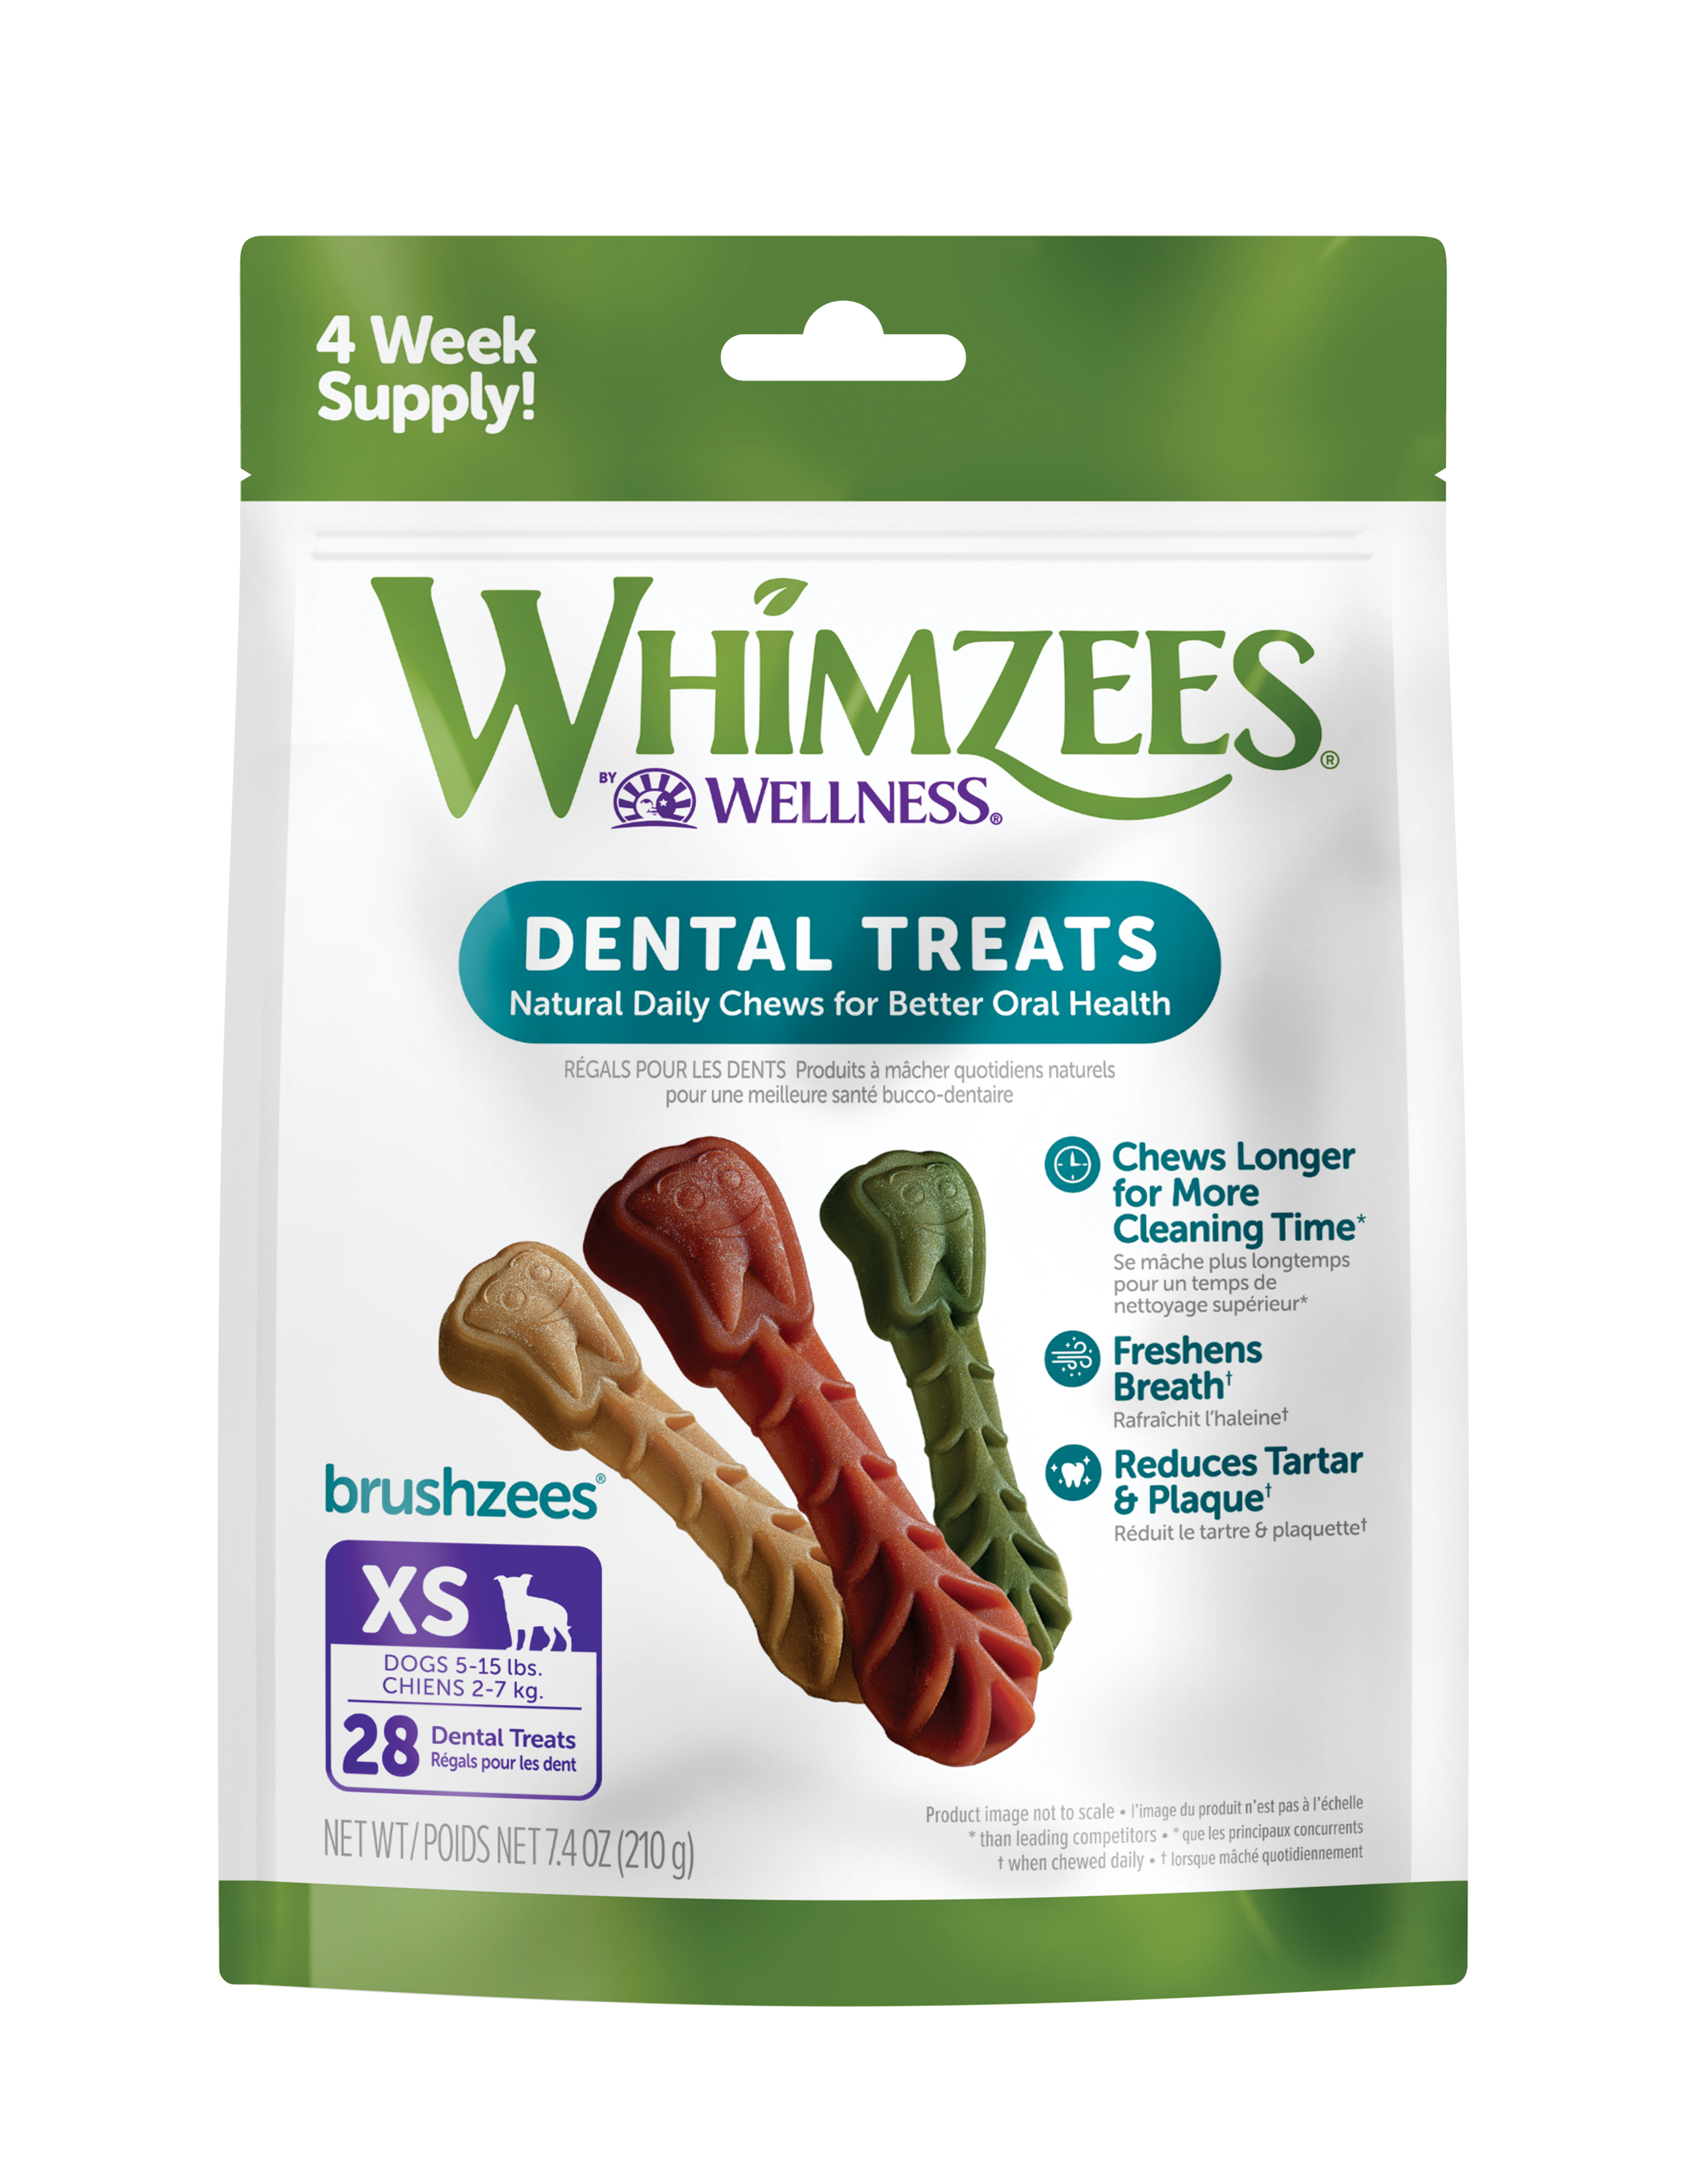 WHIMZEES Daily Use Pack